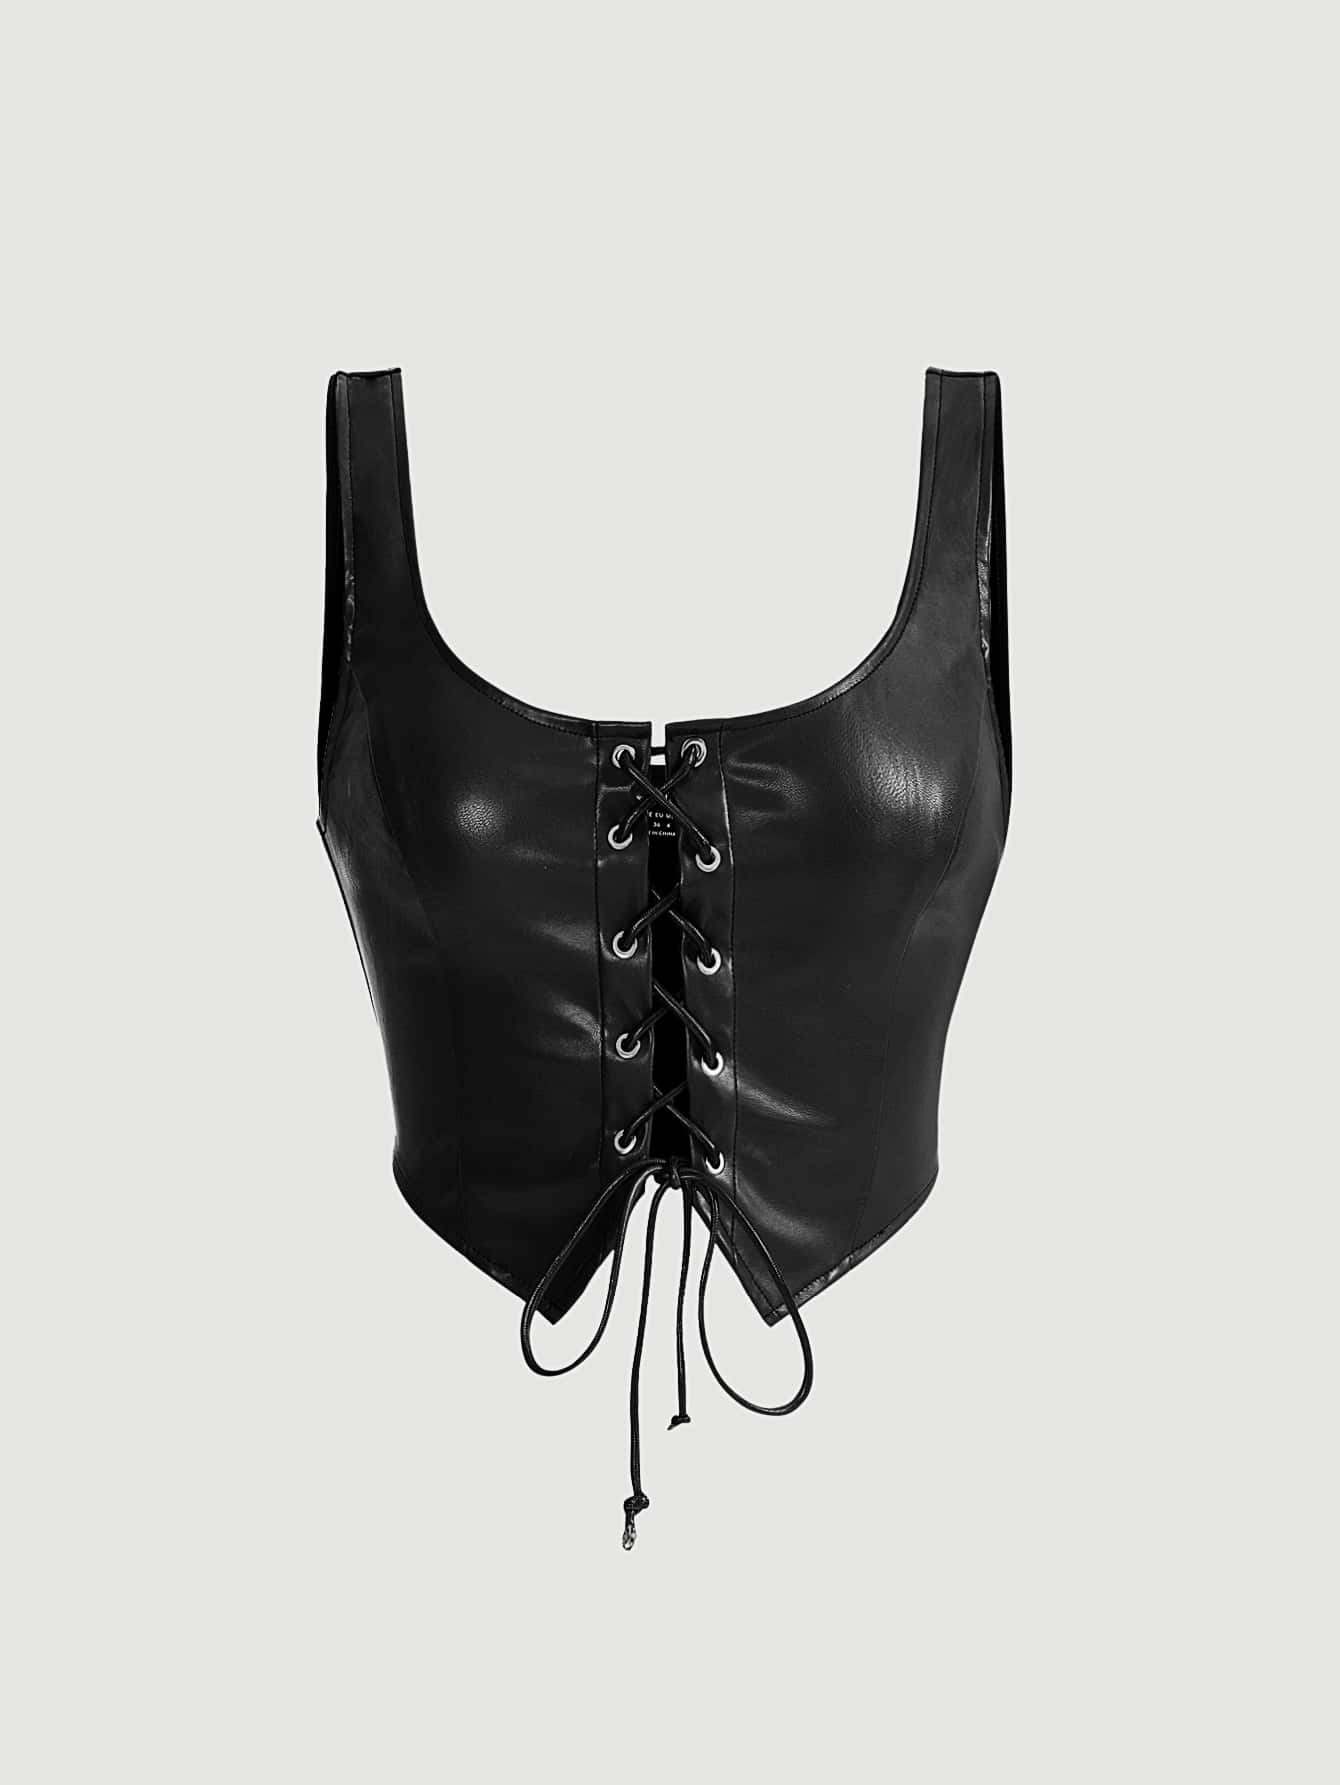 SHEIN Unity Lace Up PU Leather Halter Top